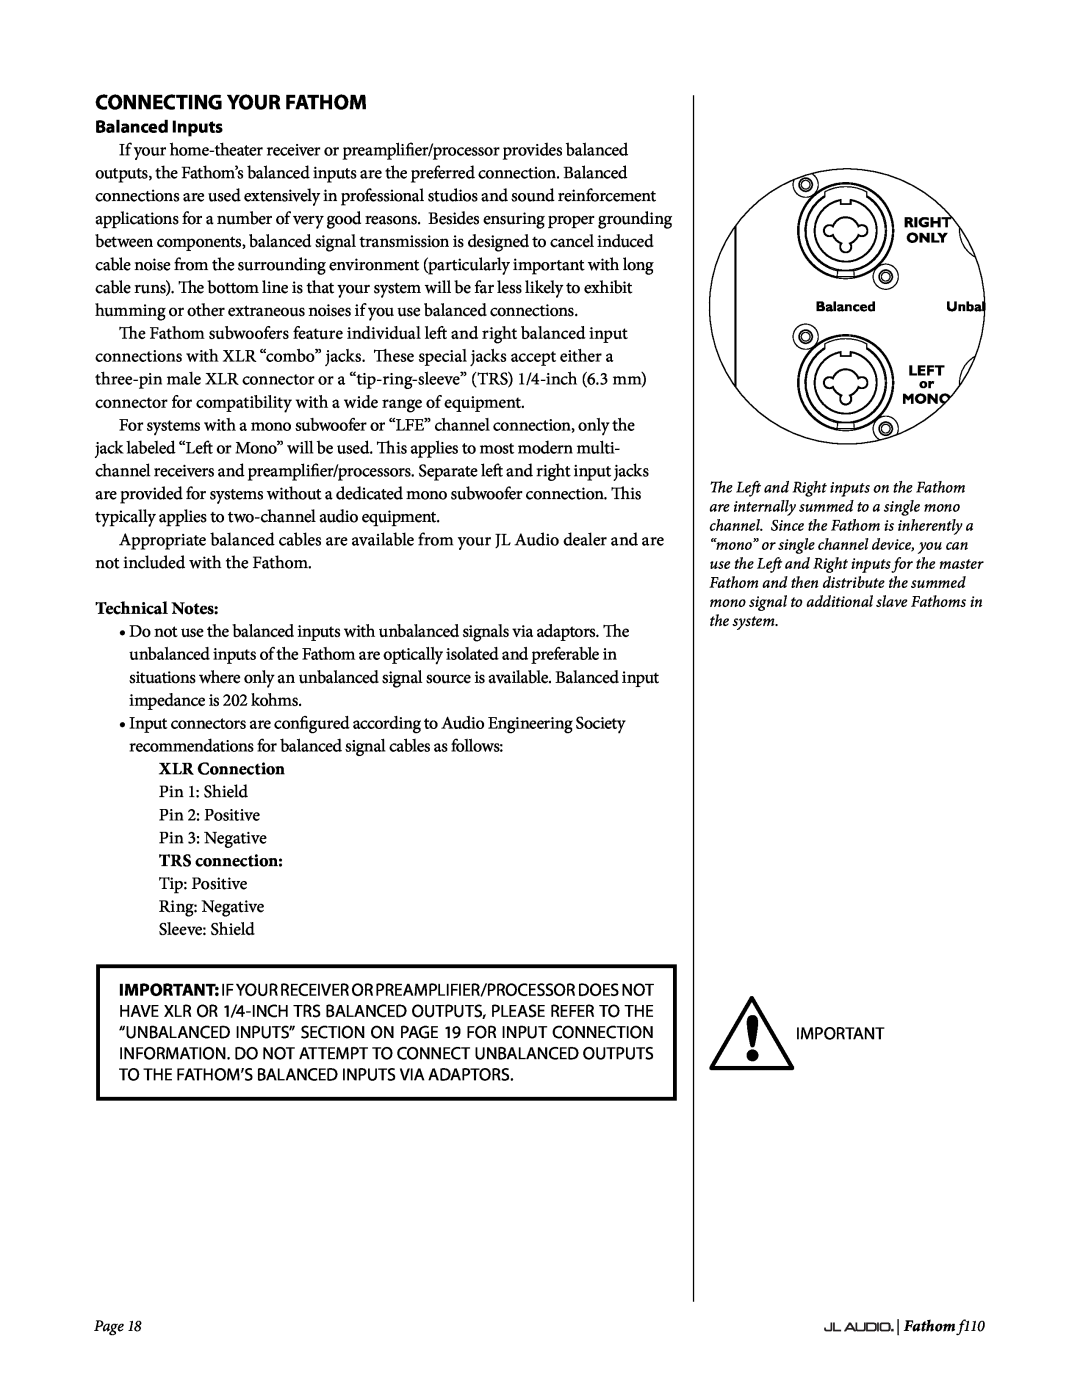 JL Audio f110 owner manual Connecting Your Fathom, Balanced Inputs, Technical Notes 